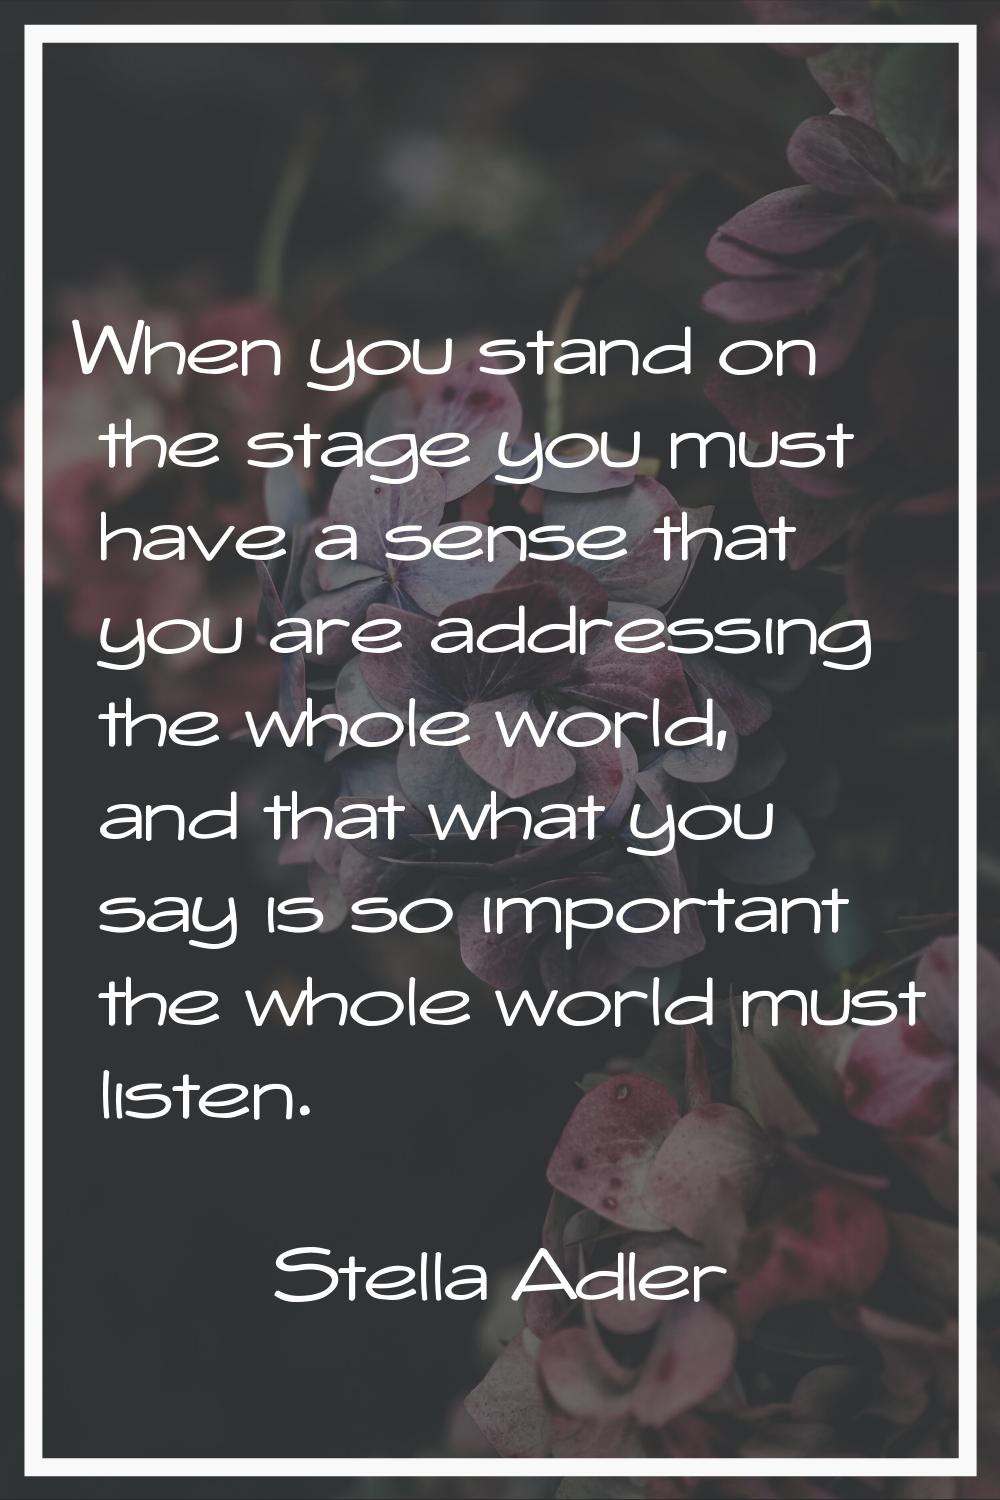 When you stand on the stage you must have a sense that you are addressing the whole world, and that